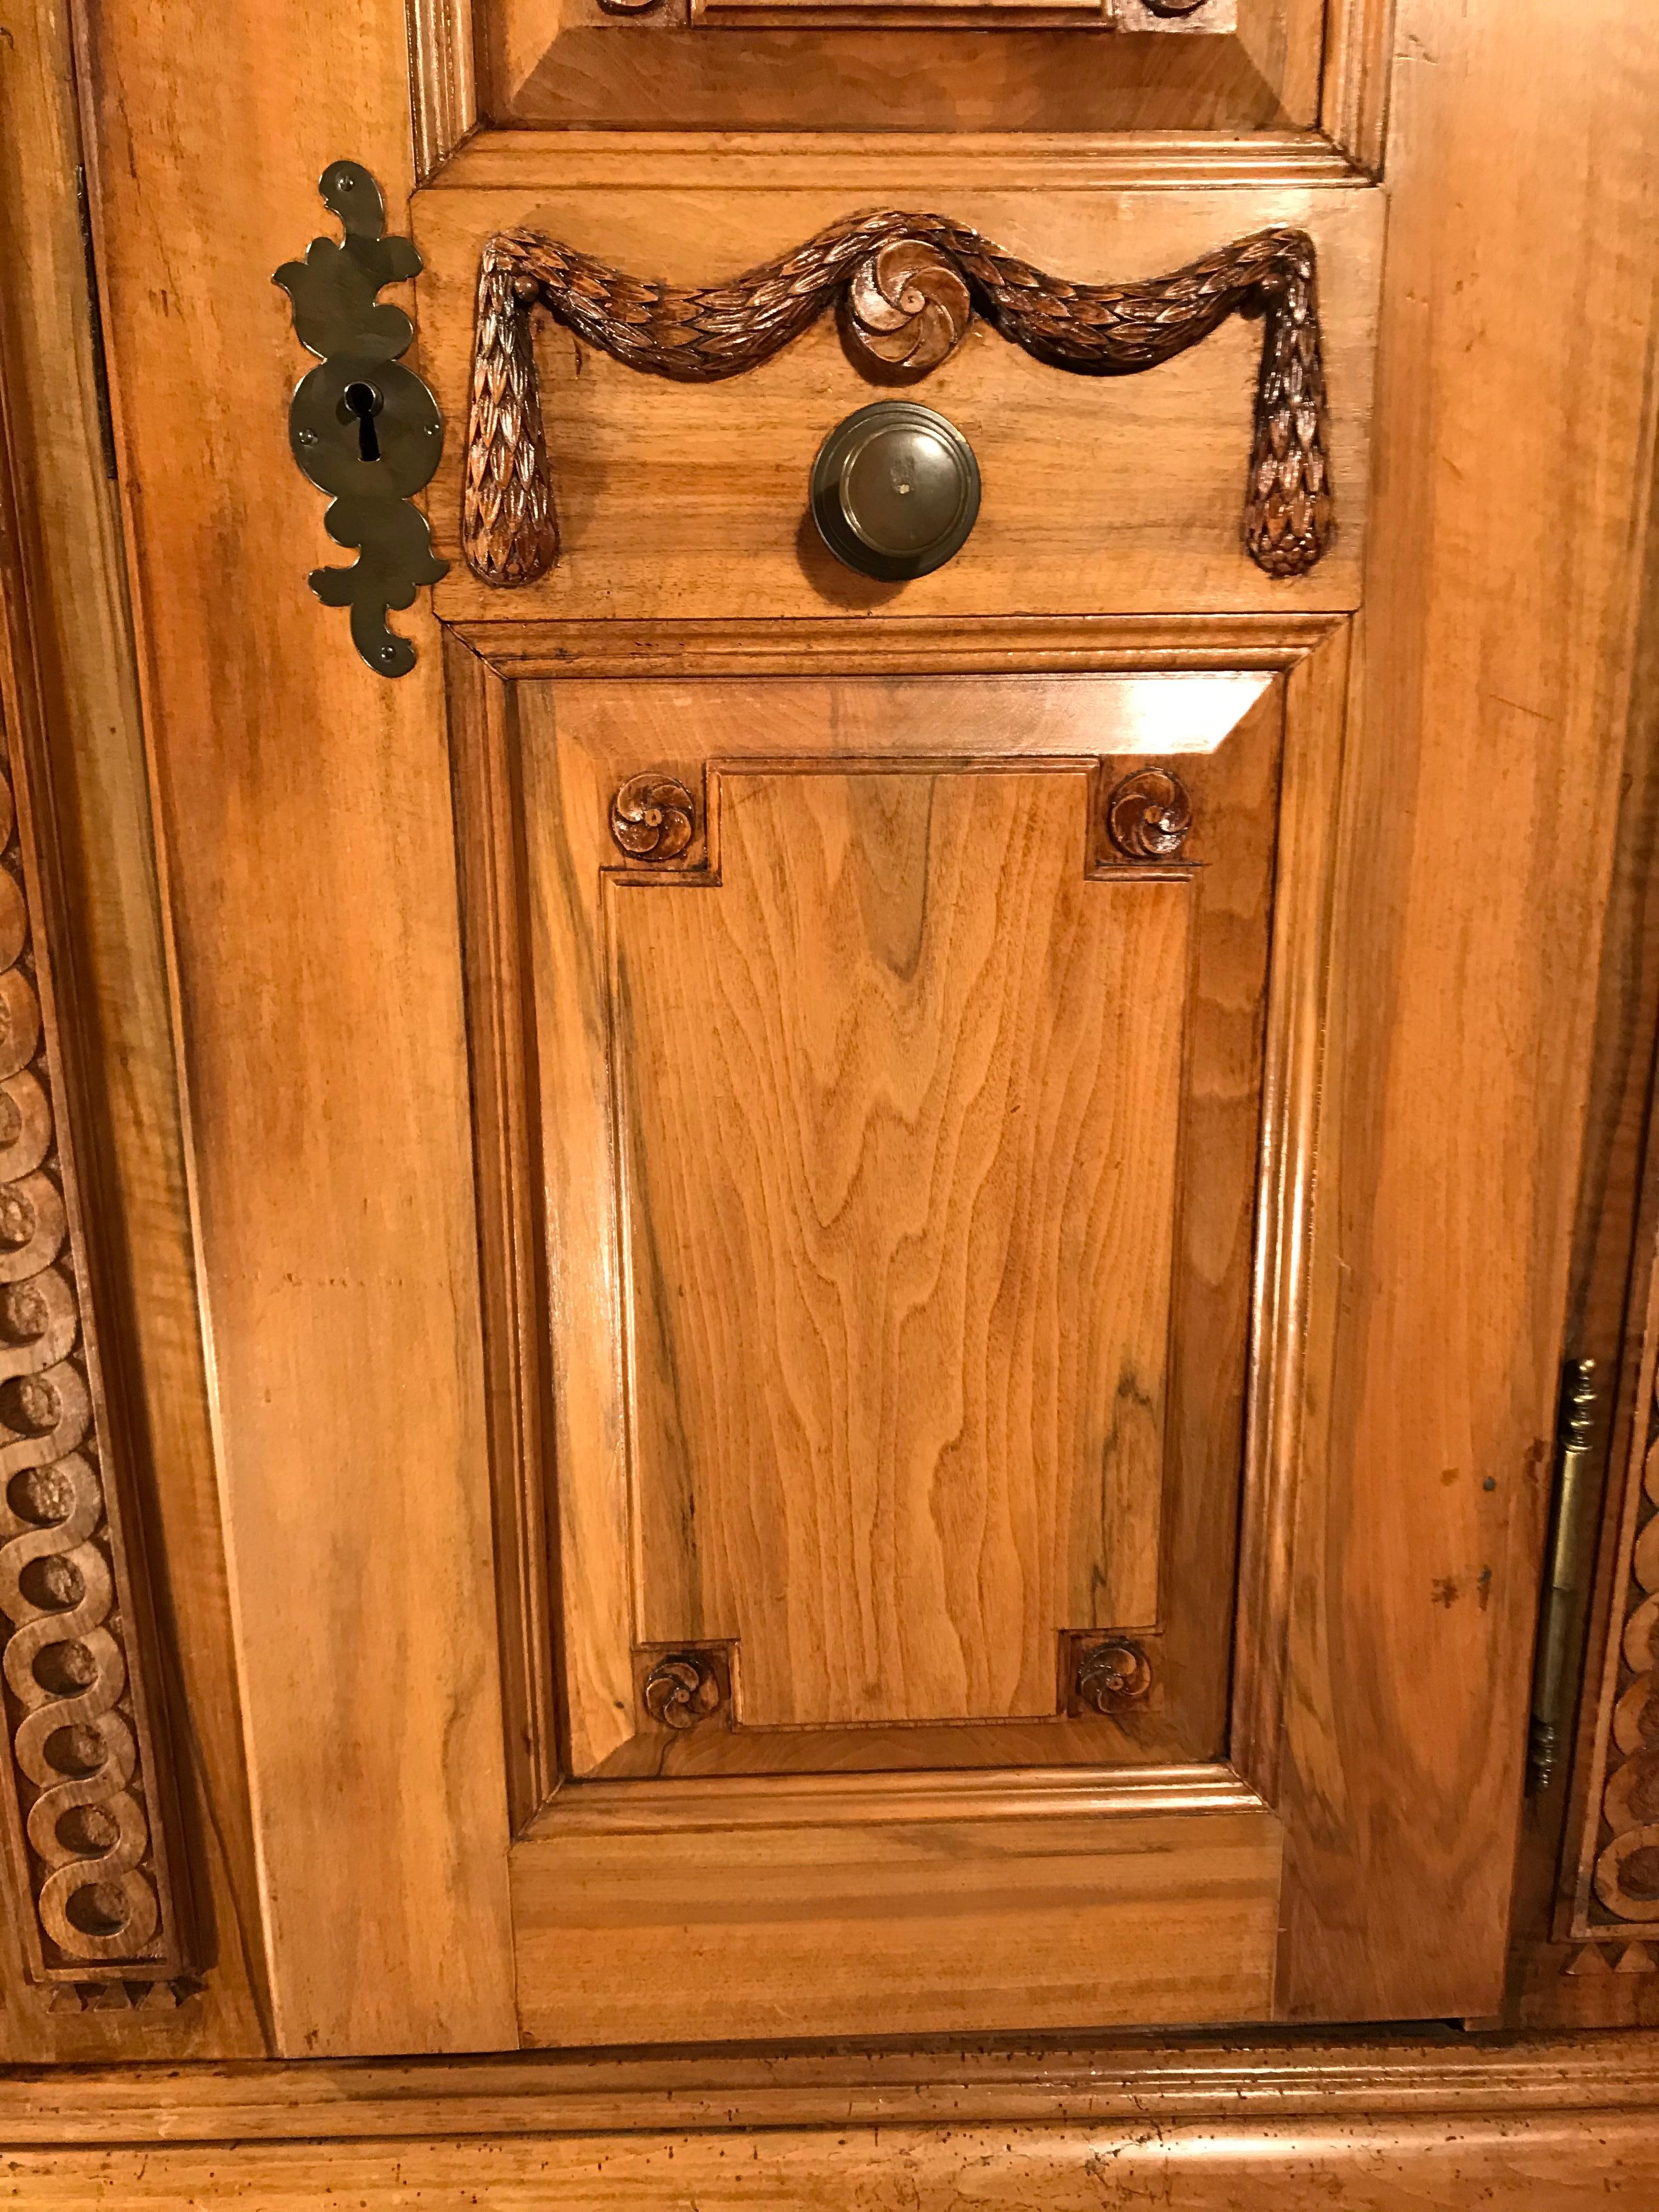 This original 18th century Louis XVI armoire, which was made in South Germany around 1780, stands out for its finely carved walnut details. Festoons and flowers decorate the two doors. Between the doors and on the sides are carved serpentine